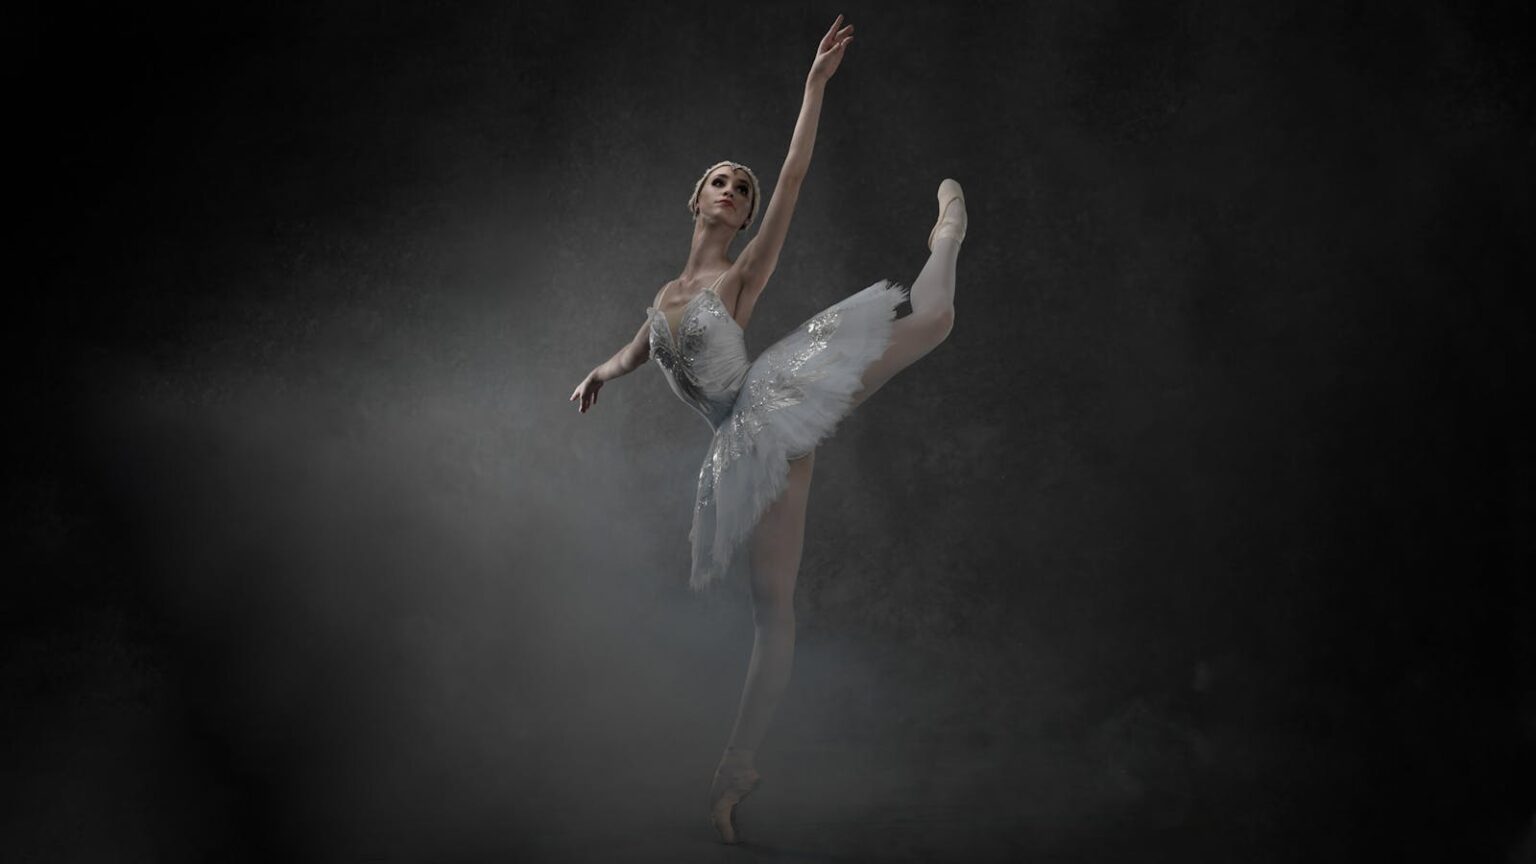 Swan Lake | presented by The Victorian State Ballet